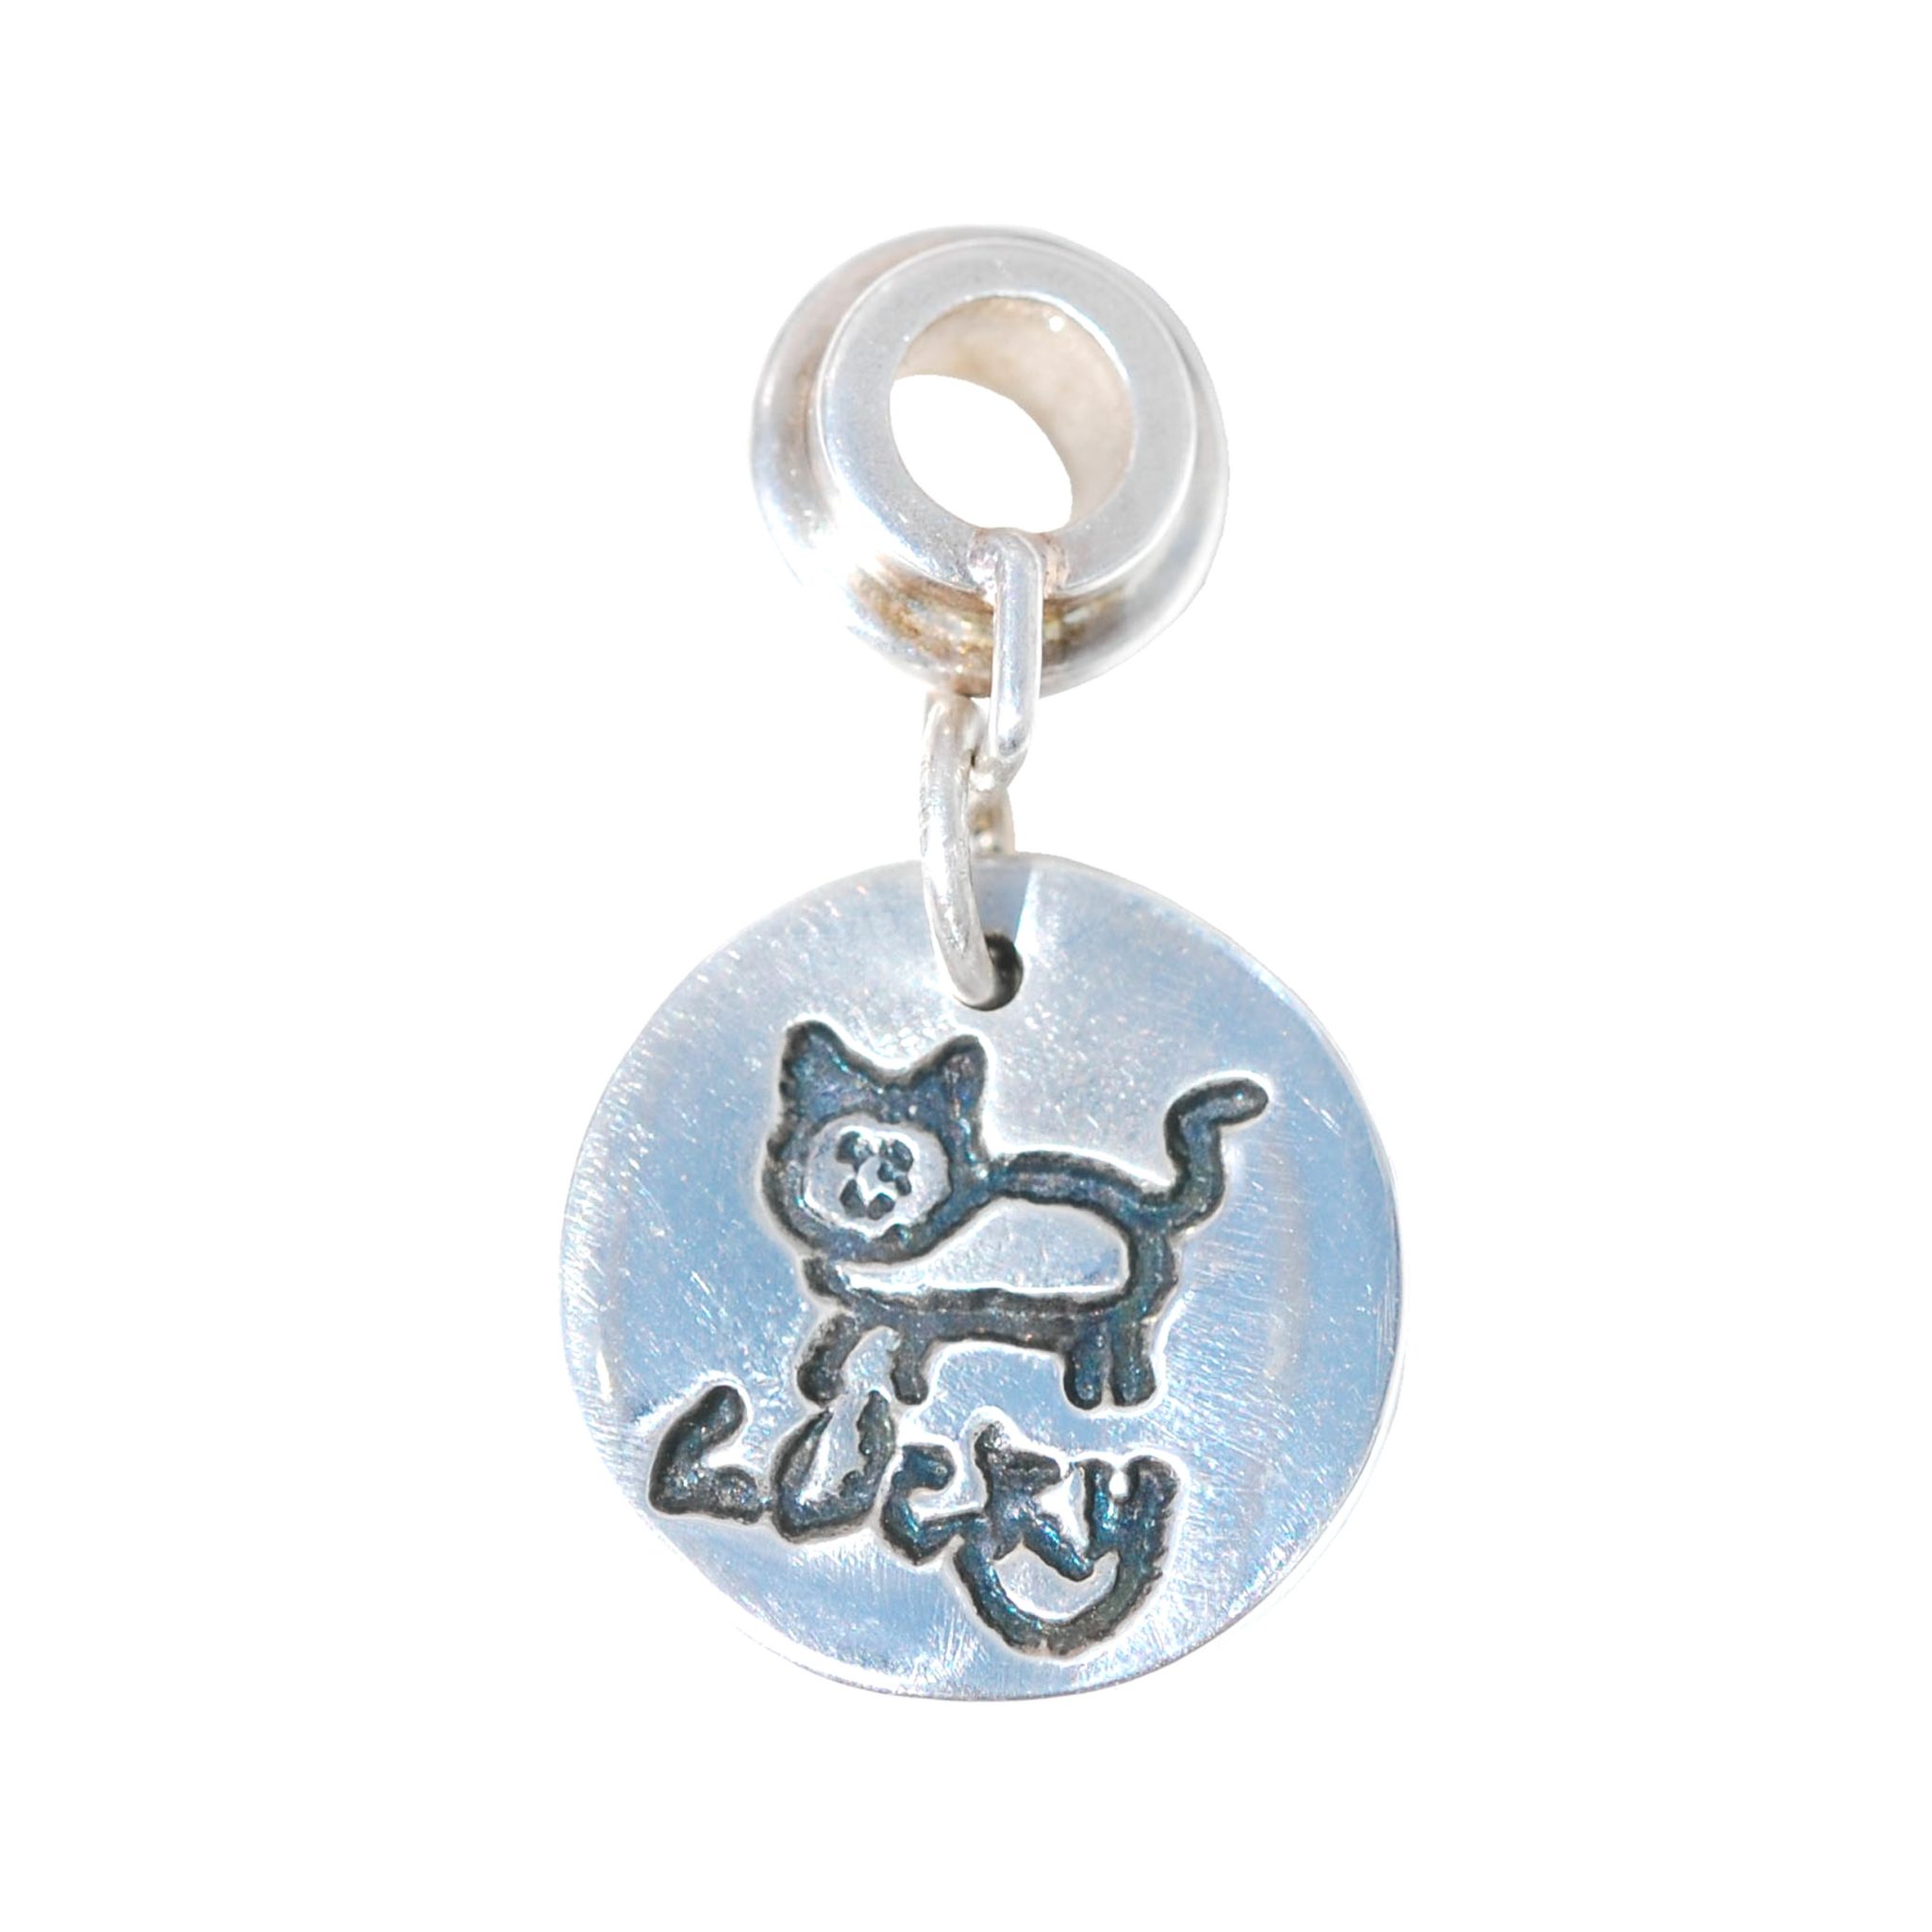 Small silver charm showcasing your child's drawing